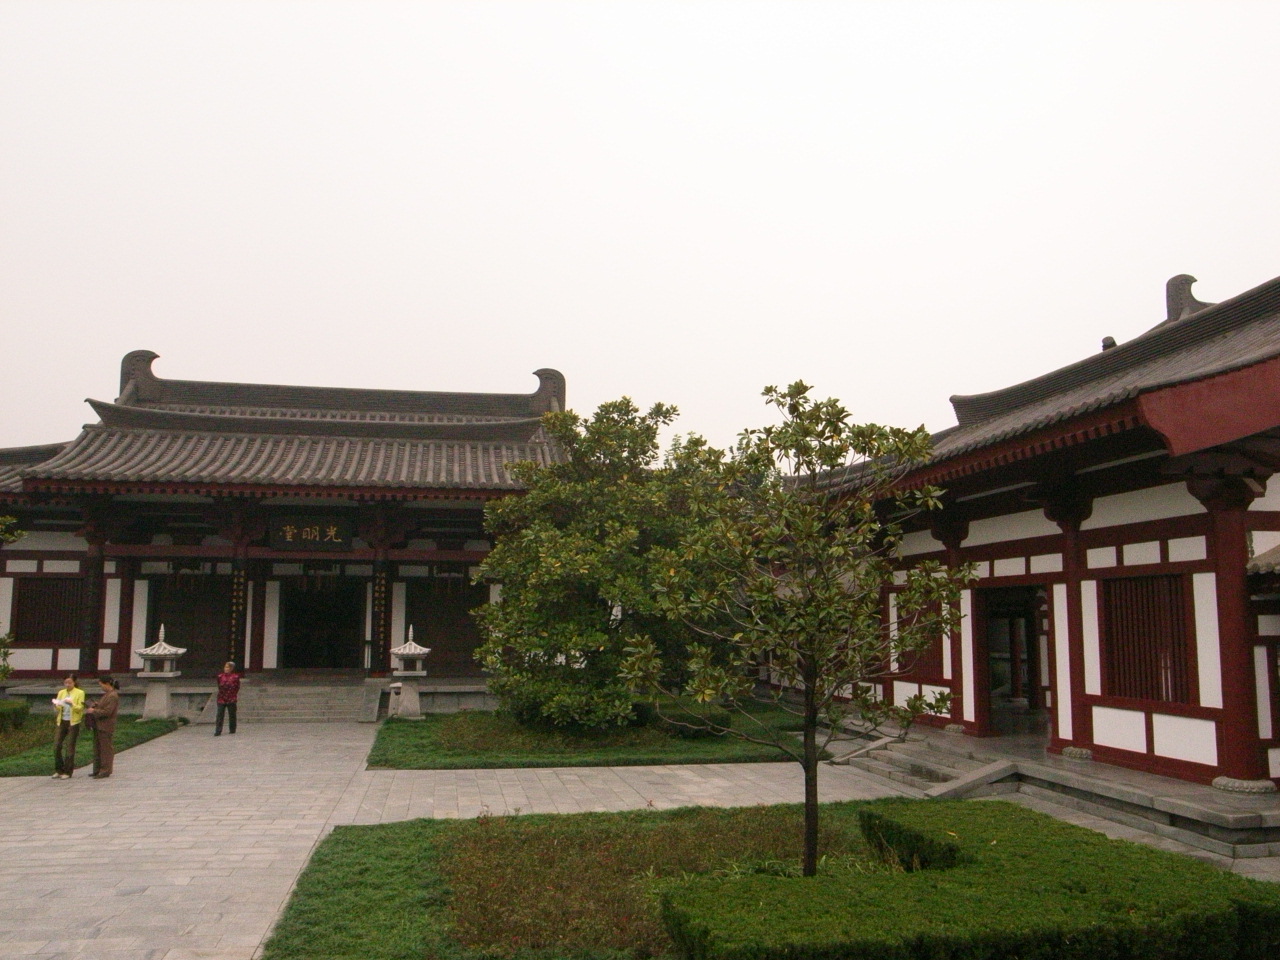 the courtyard of an ancient chinese building is seen with some grass and trees